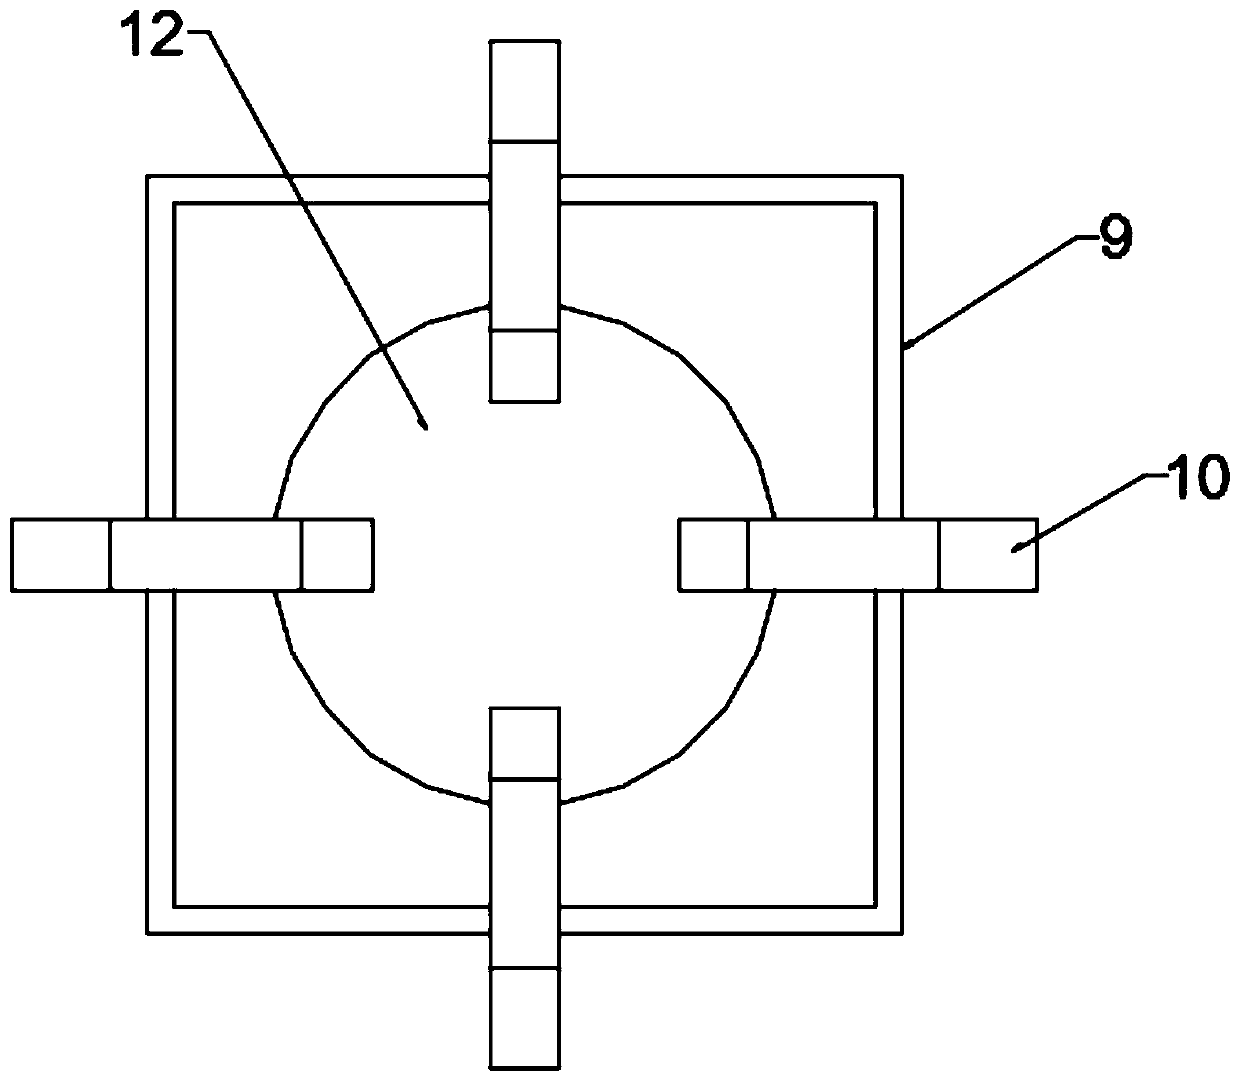 A rotary stamping die ejection mechanism